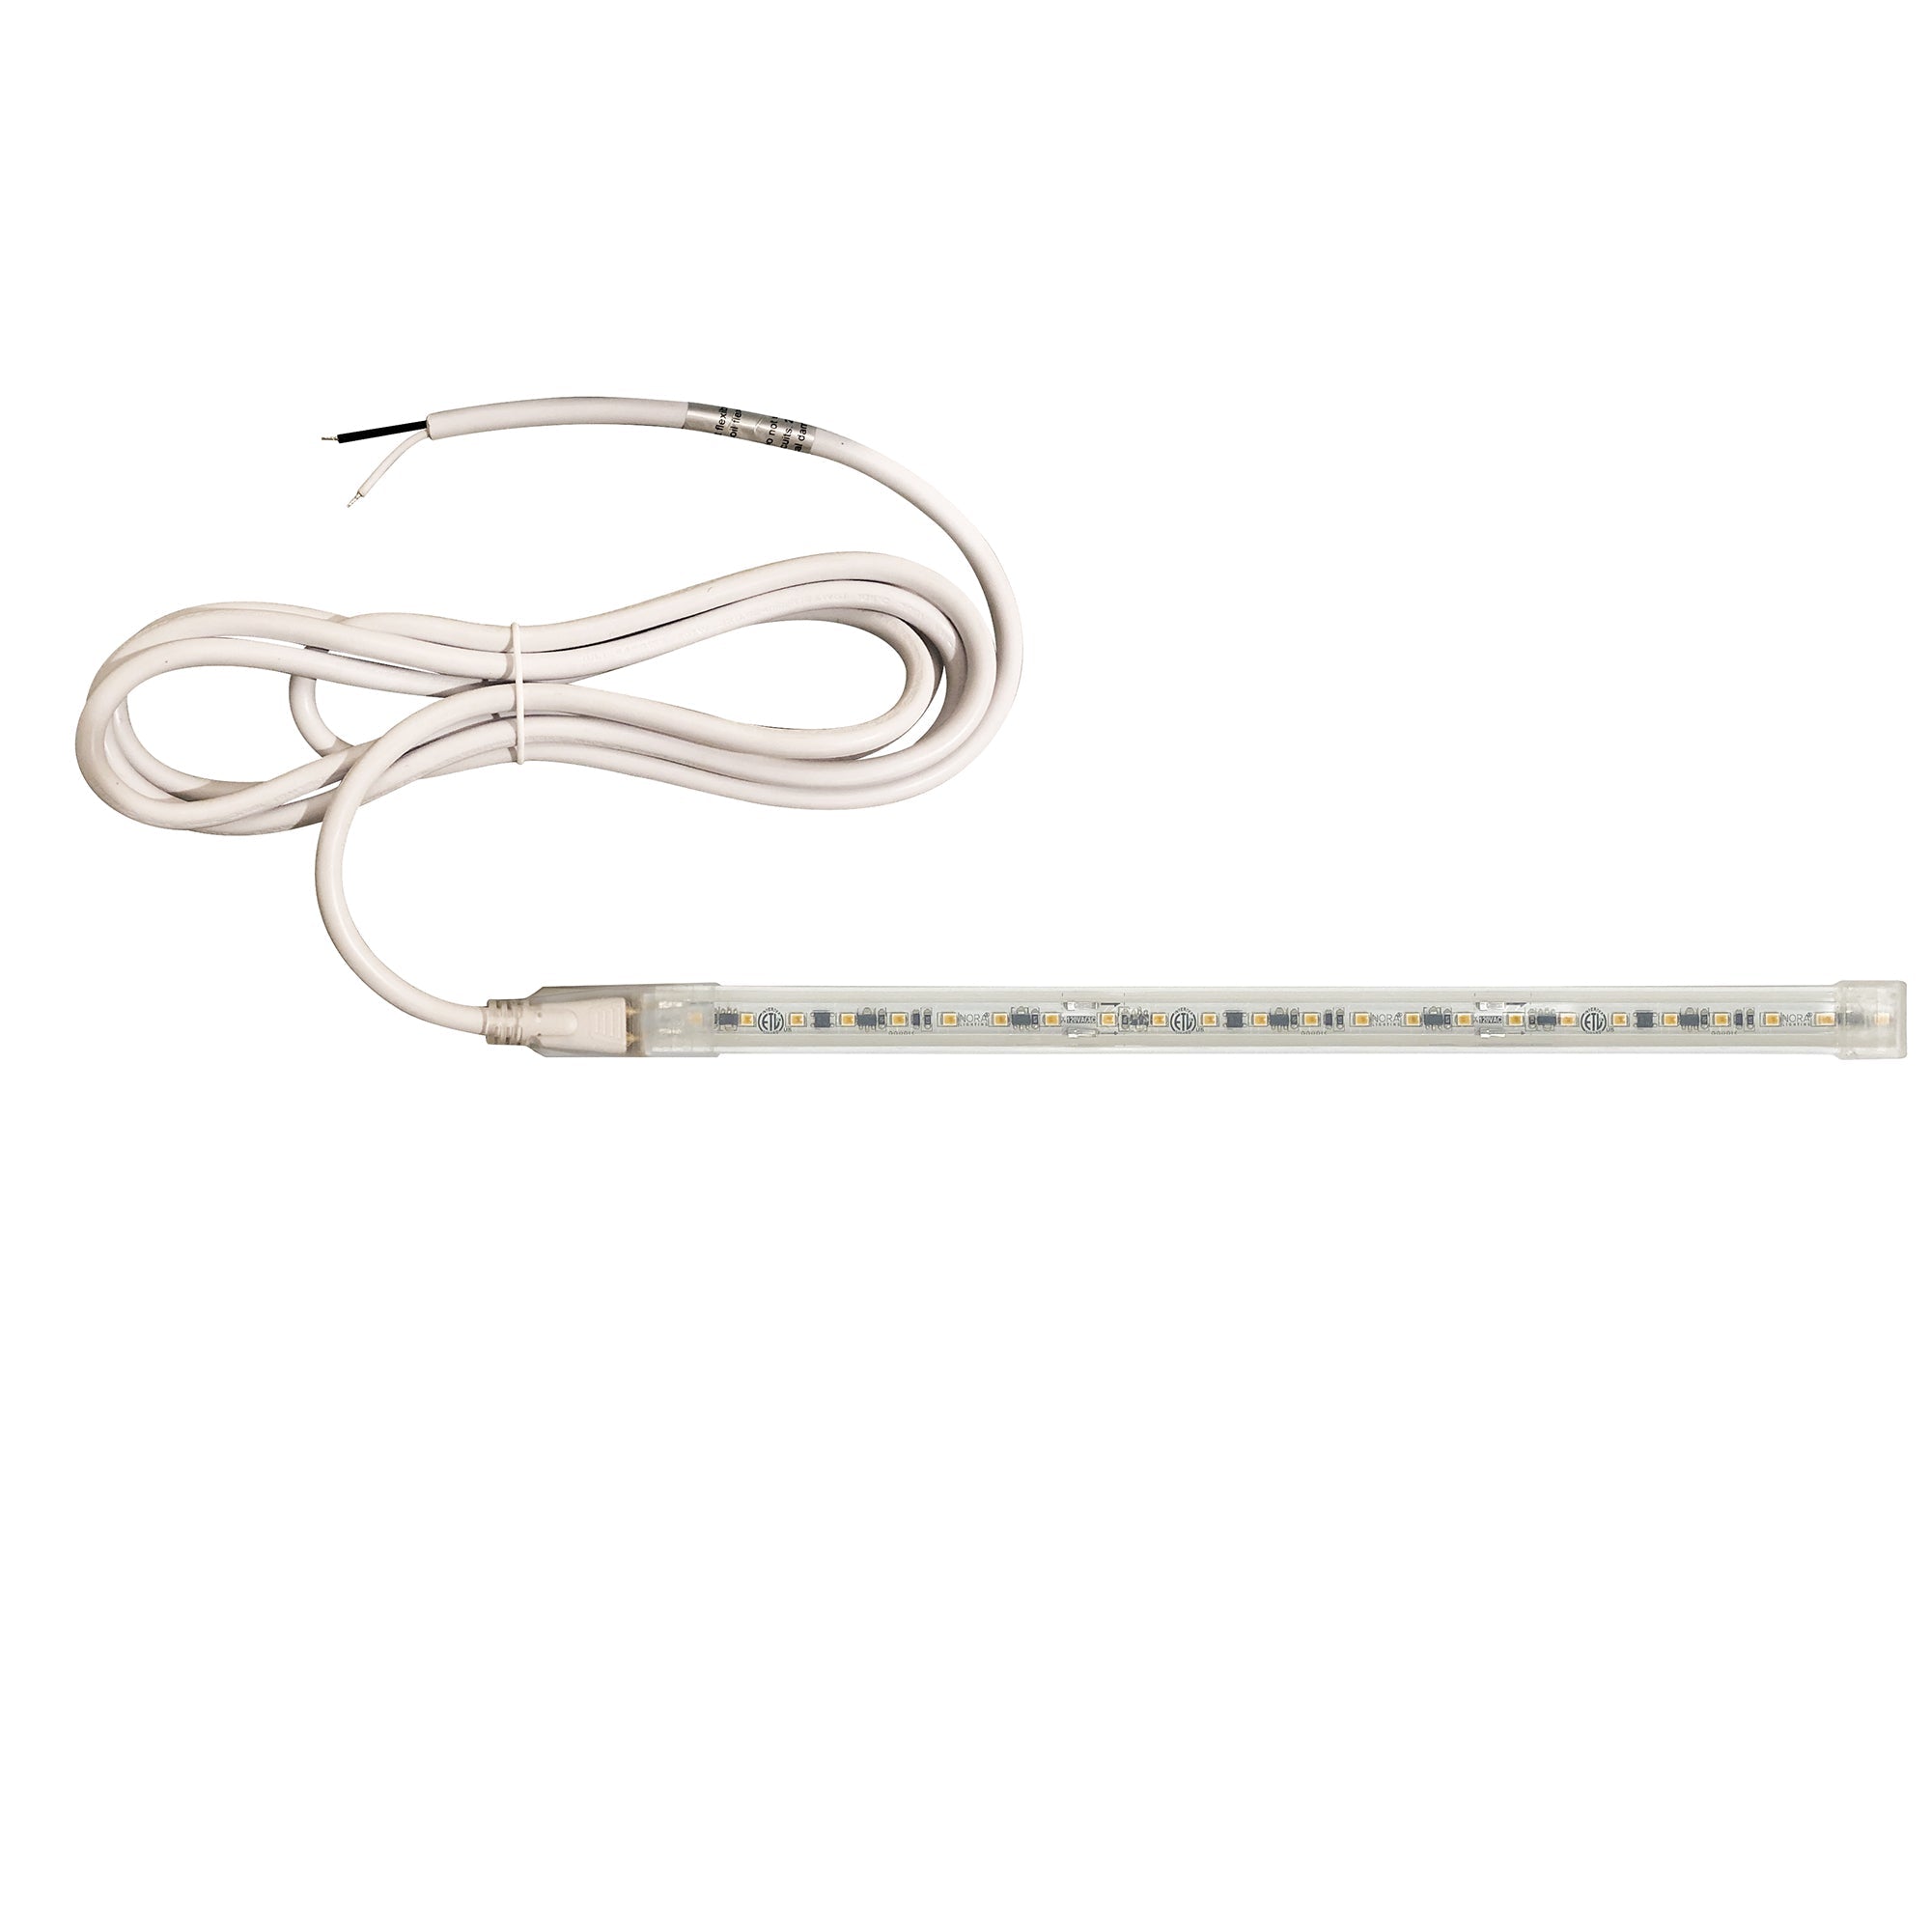 Nora Lighting NUTP13-W119-12-930/HW - Accent / Undercabinet - Custom Cut 119-ft 120V Continuous LED Tape Light, 330lm / 3.6W per foot, 3000K, w/ Mounting Clips and 8' Hardwired Power Cord